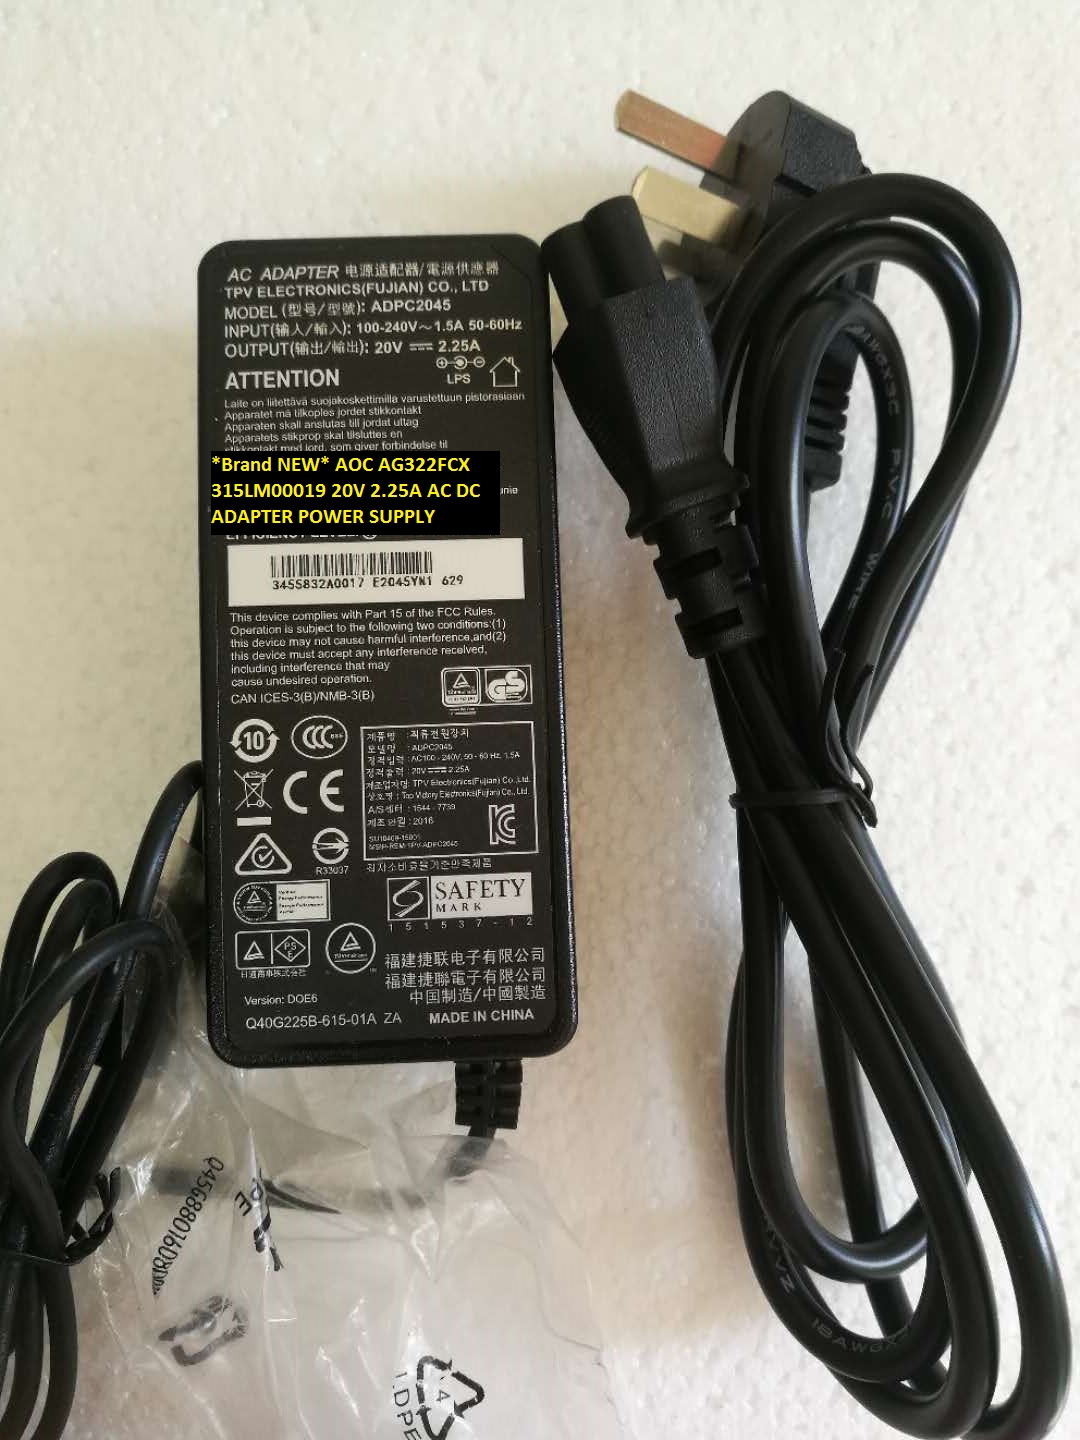 *Brand NEW* AOC 315LM00019 AG322FCX 20V 2.25A AC DC ADAPTER POWER SUPPLY